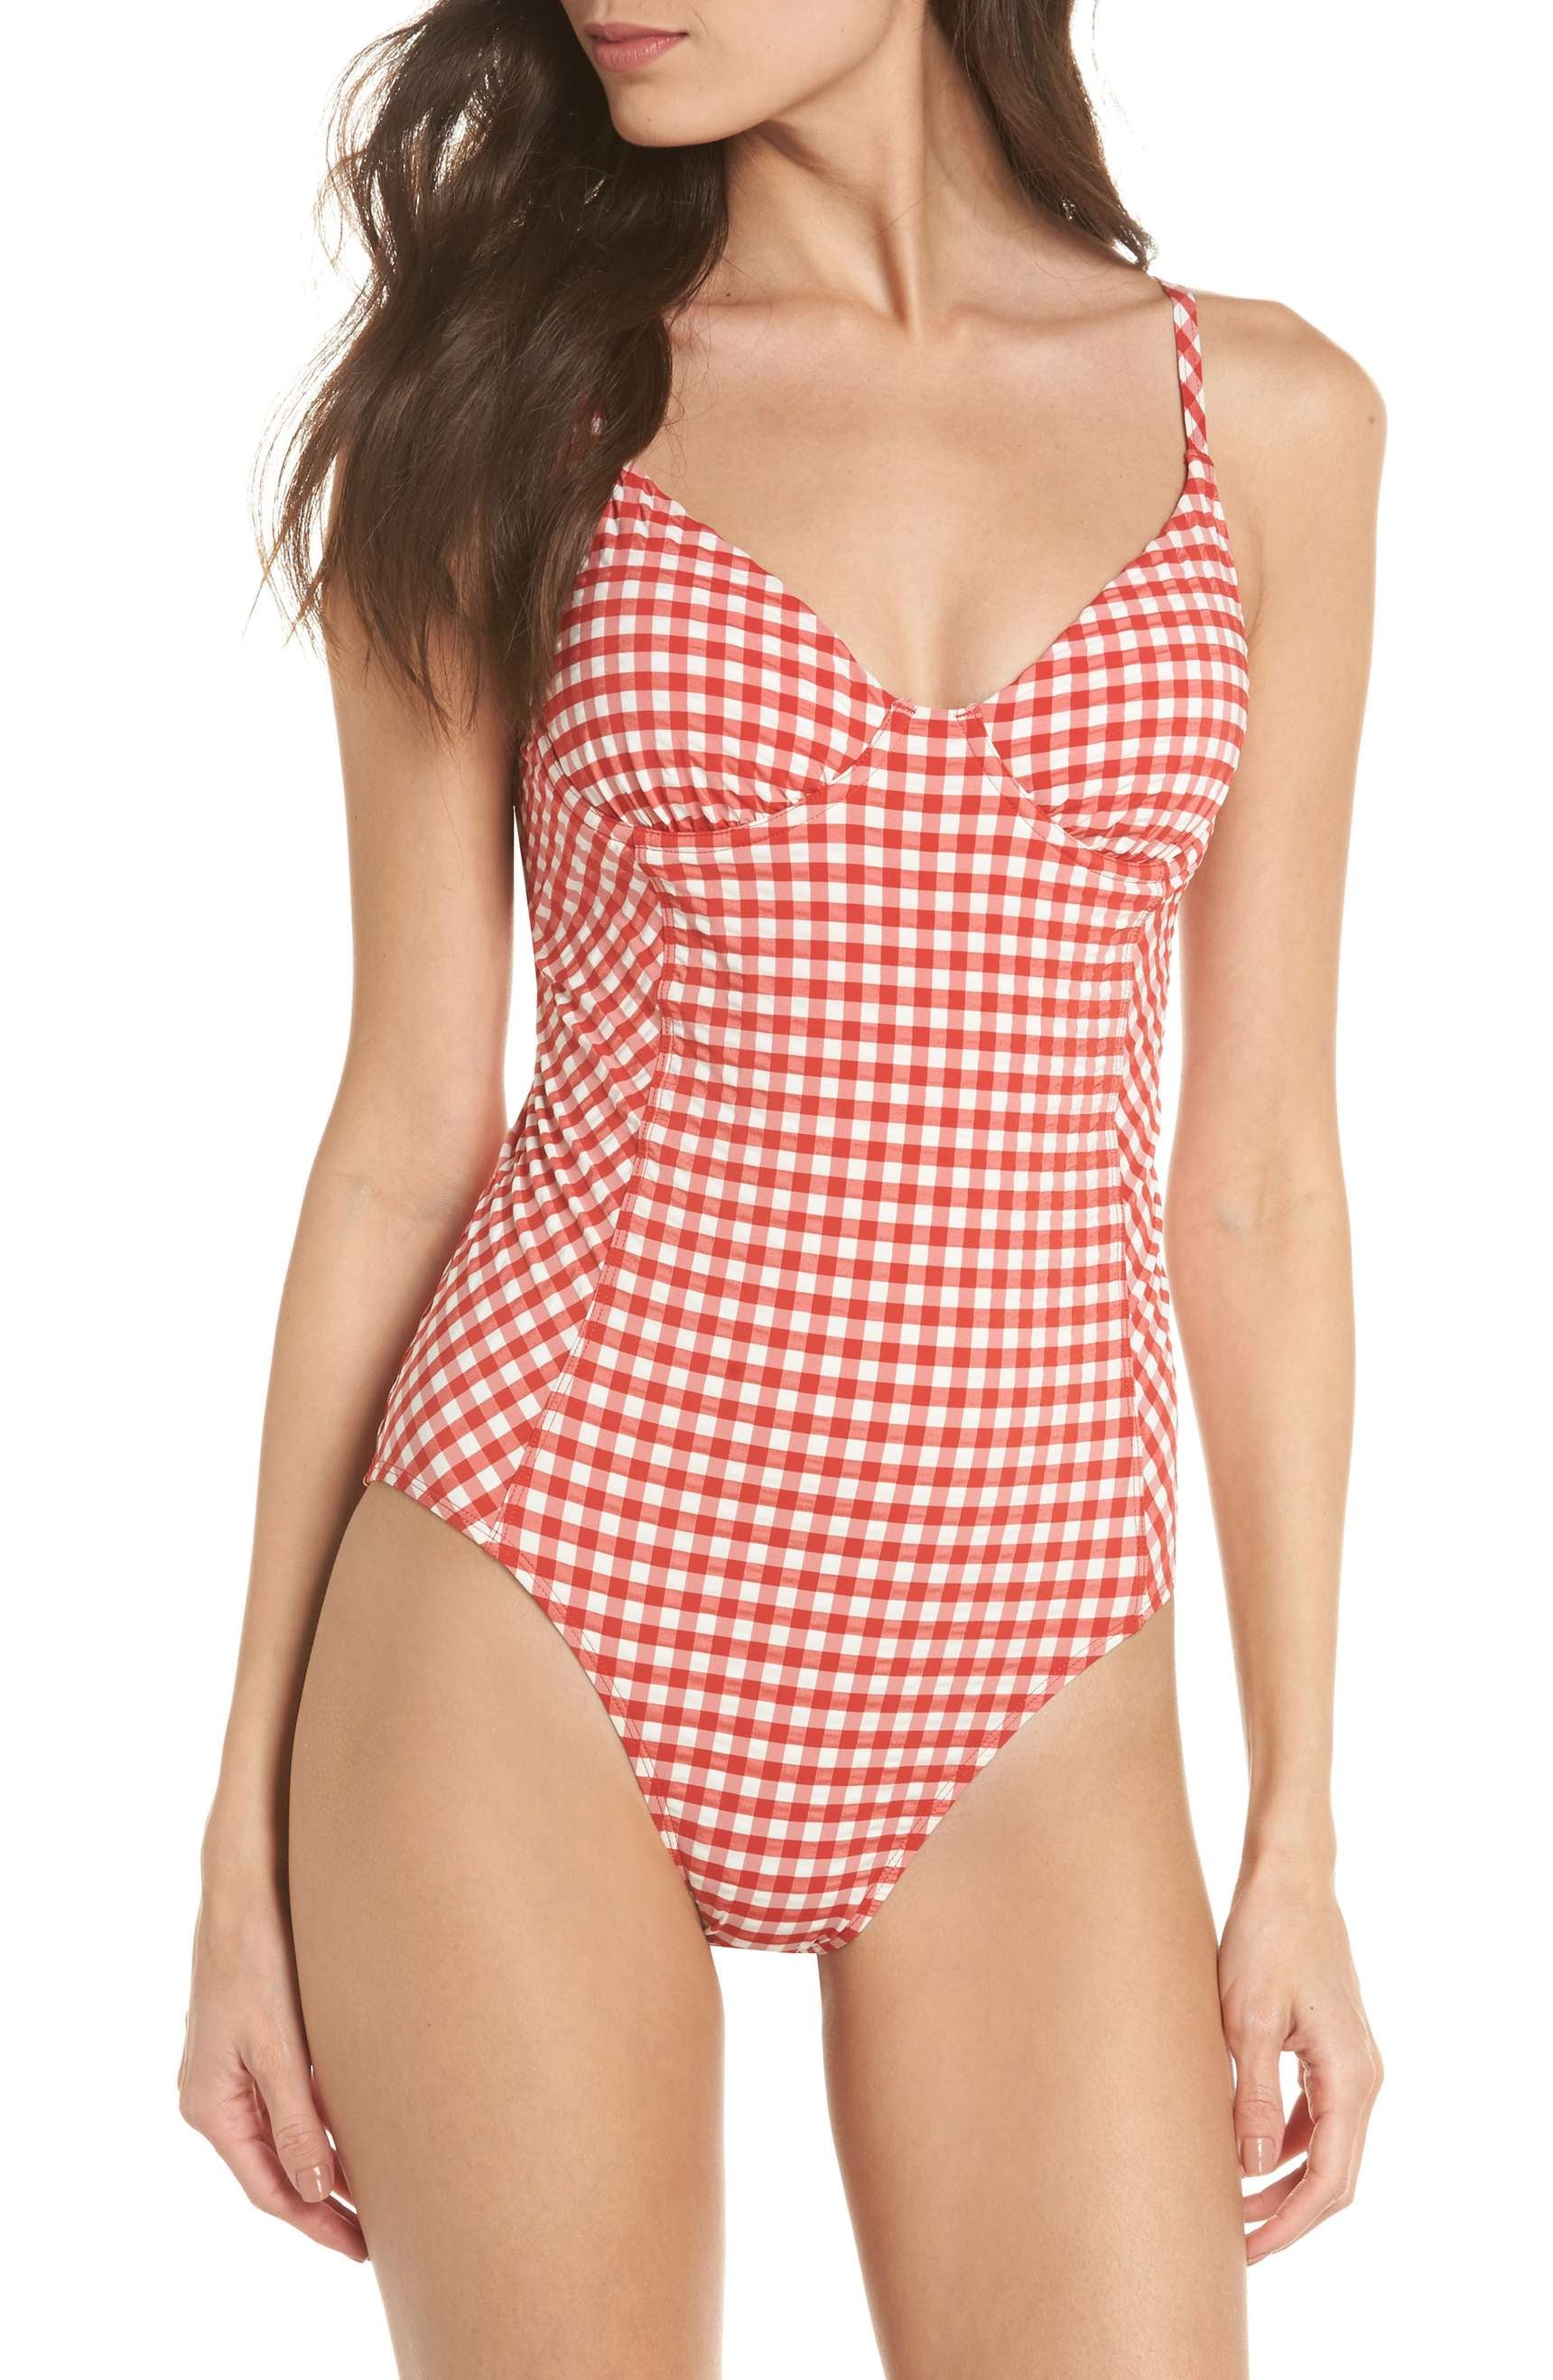 Tory Burch Gingham One-Piece Underwire Swimsuit | These 11 Cute, Supportive  Swimsuits Will Help You Feel Your Best at the Beach | POPSUGAR Fashion  Photo 6